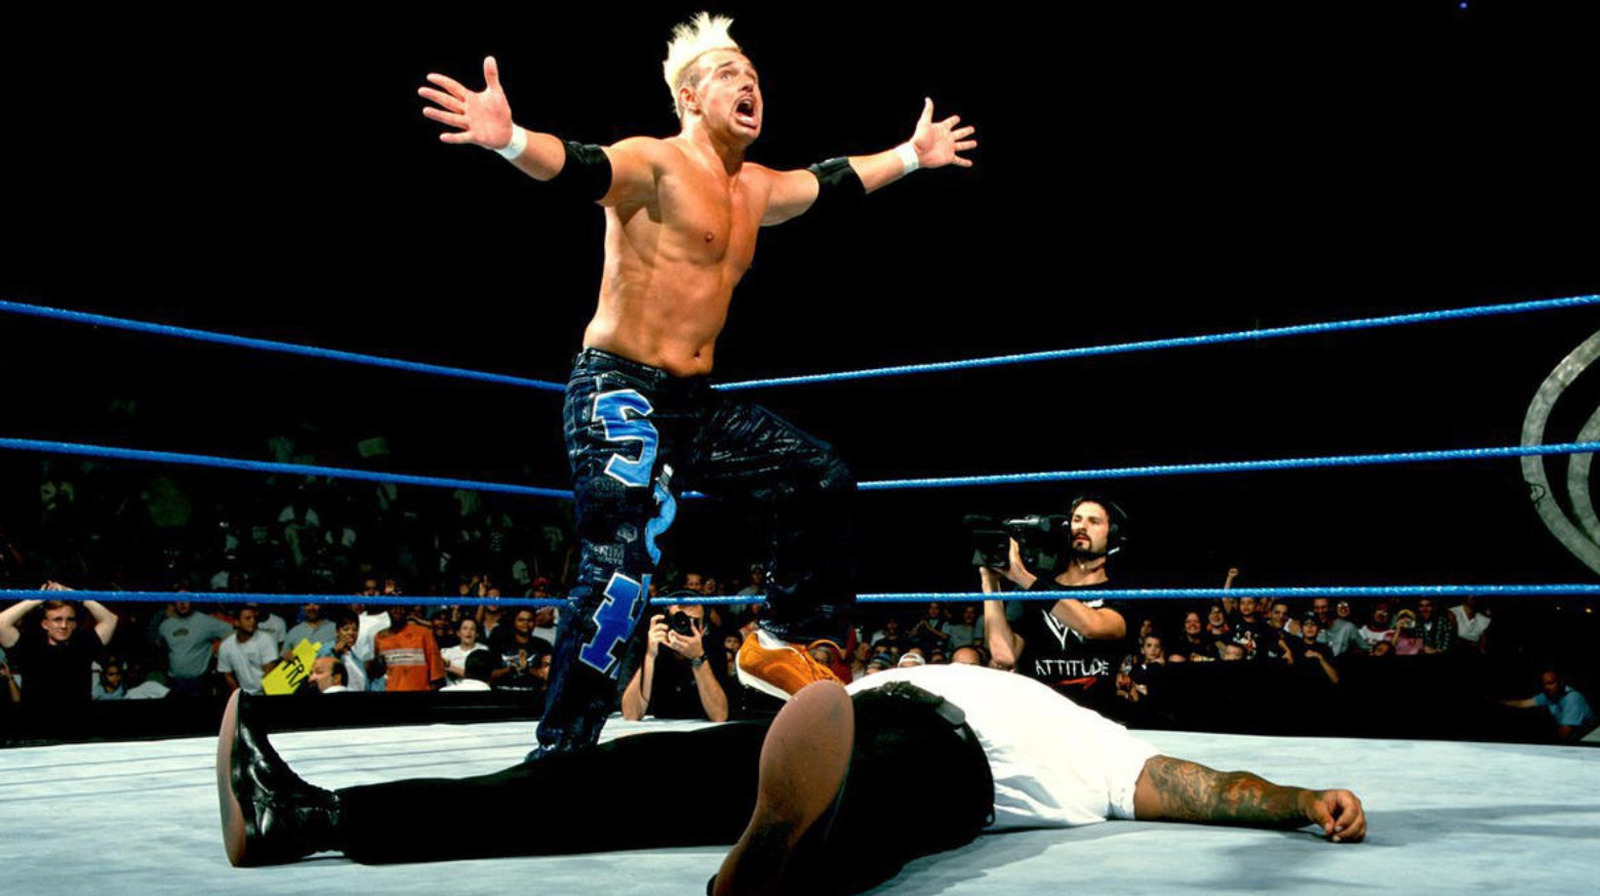 Scotty 2 Hotty Talks About His Coaching Philosophy Backstage As An AEW ...